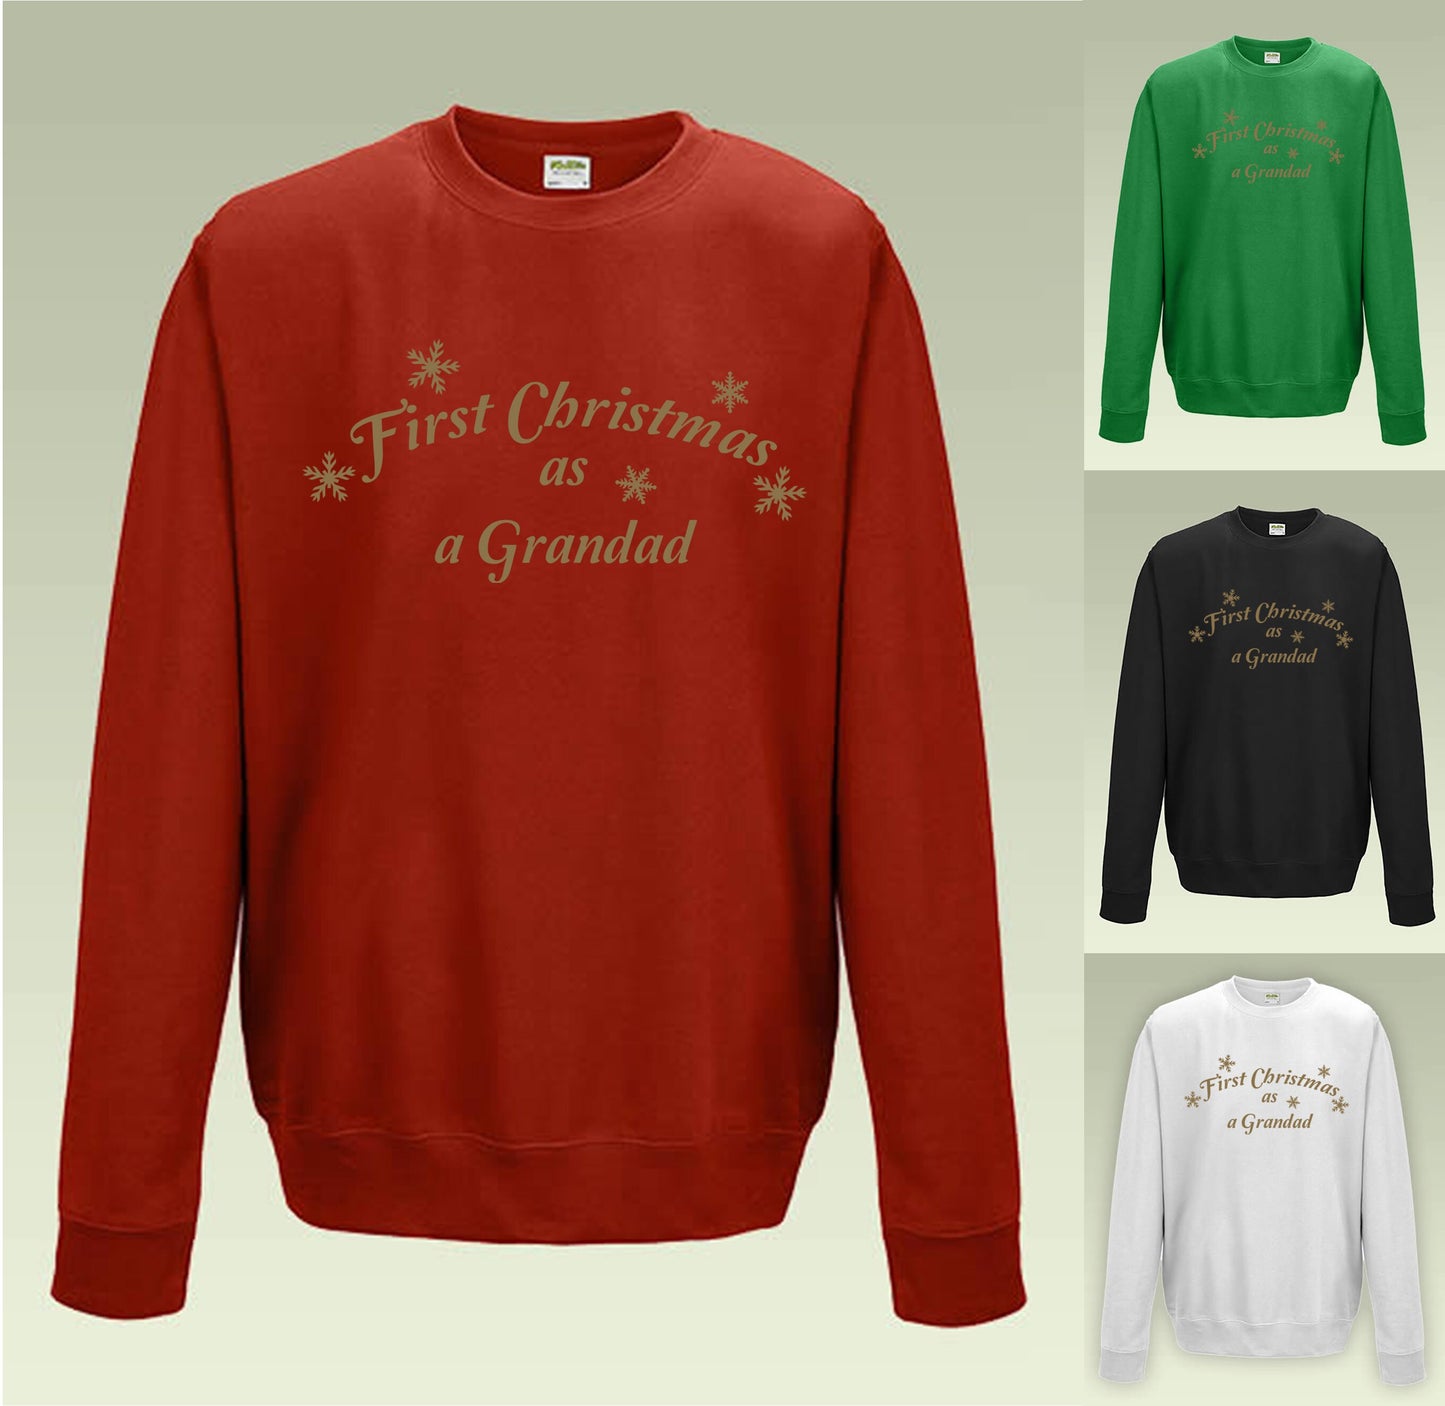 First Christmas a Grandad Sweatshirt JH030 Funny Jumper Sweater - We can change to Grandpa or Papa or any other variation